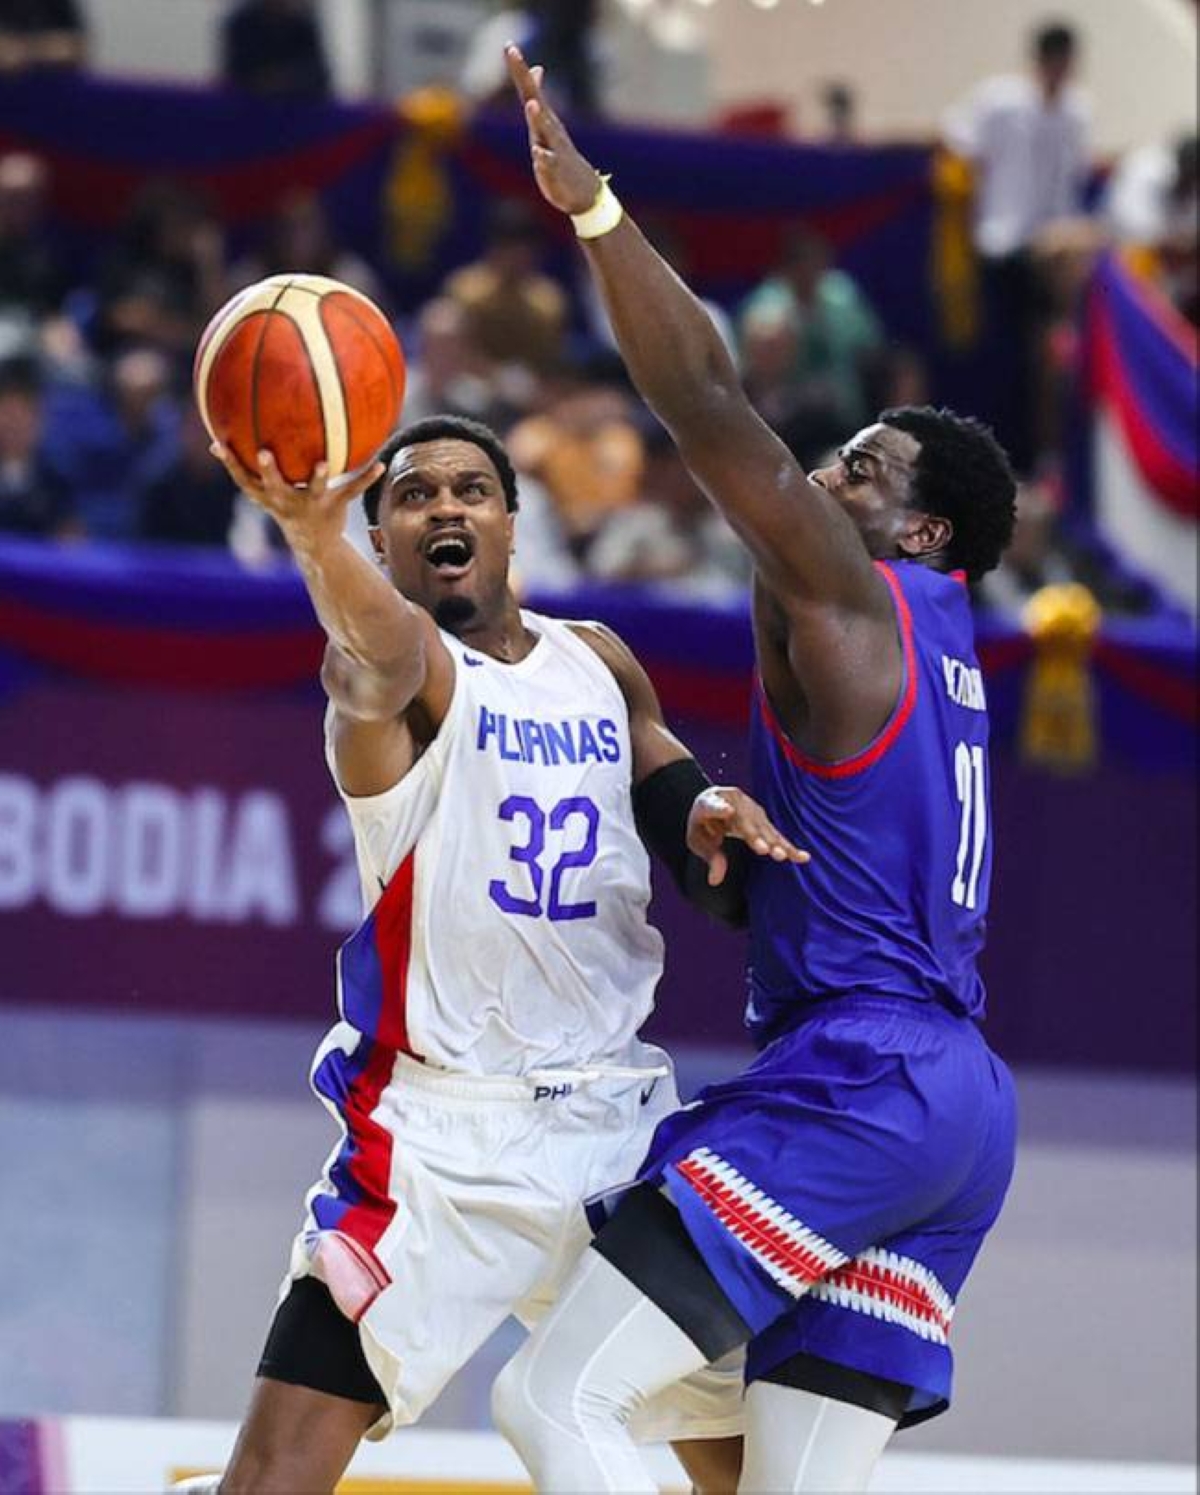 brownlee awaits fiba final verdict on doping issue